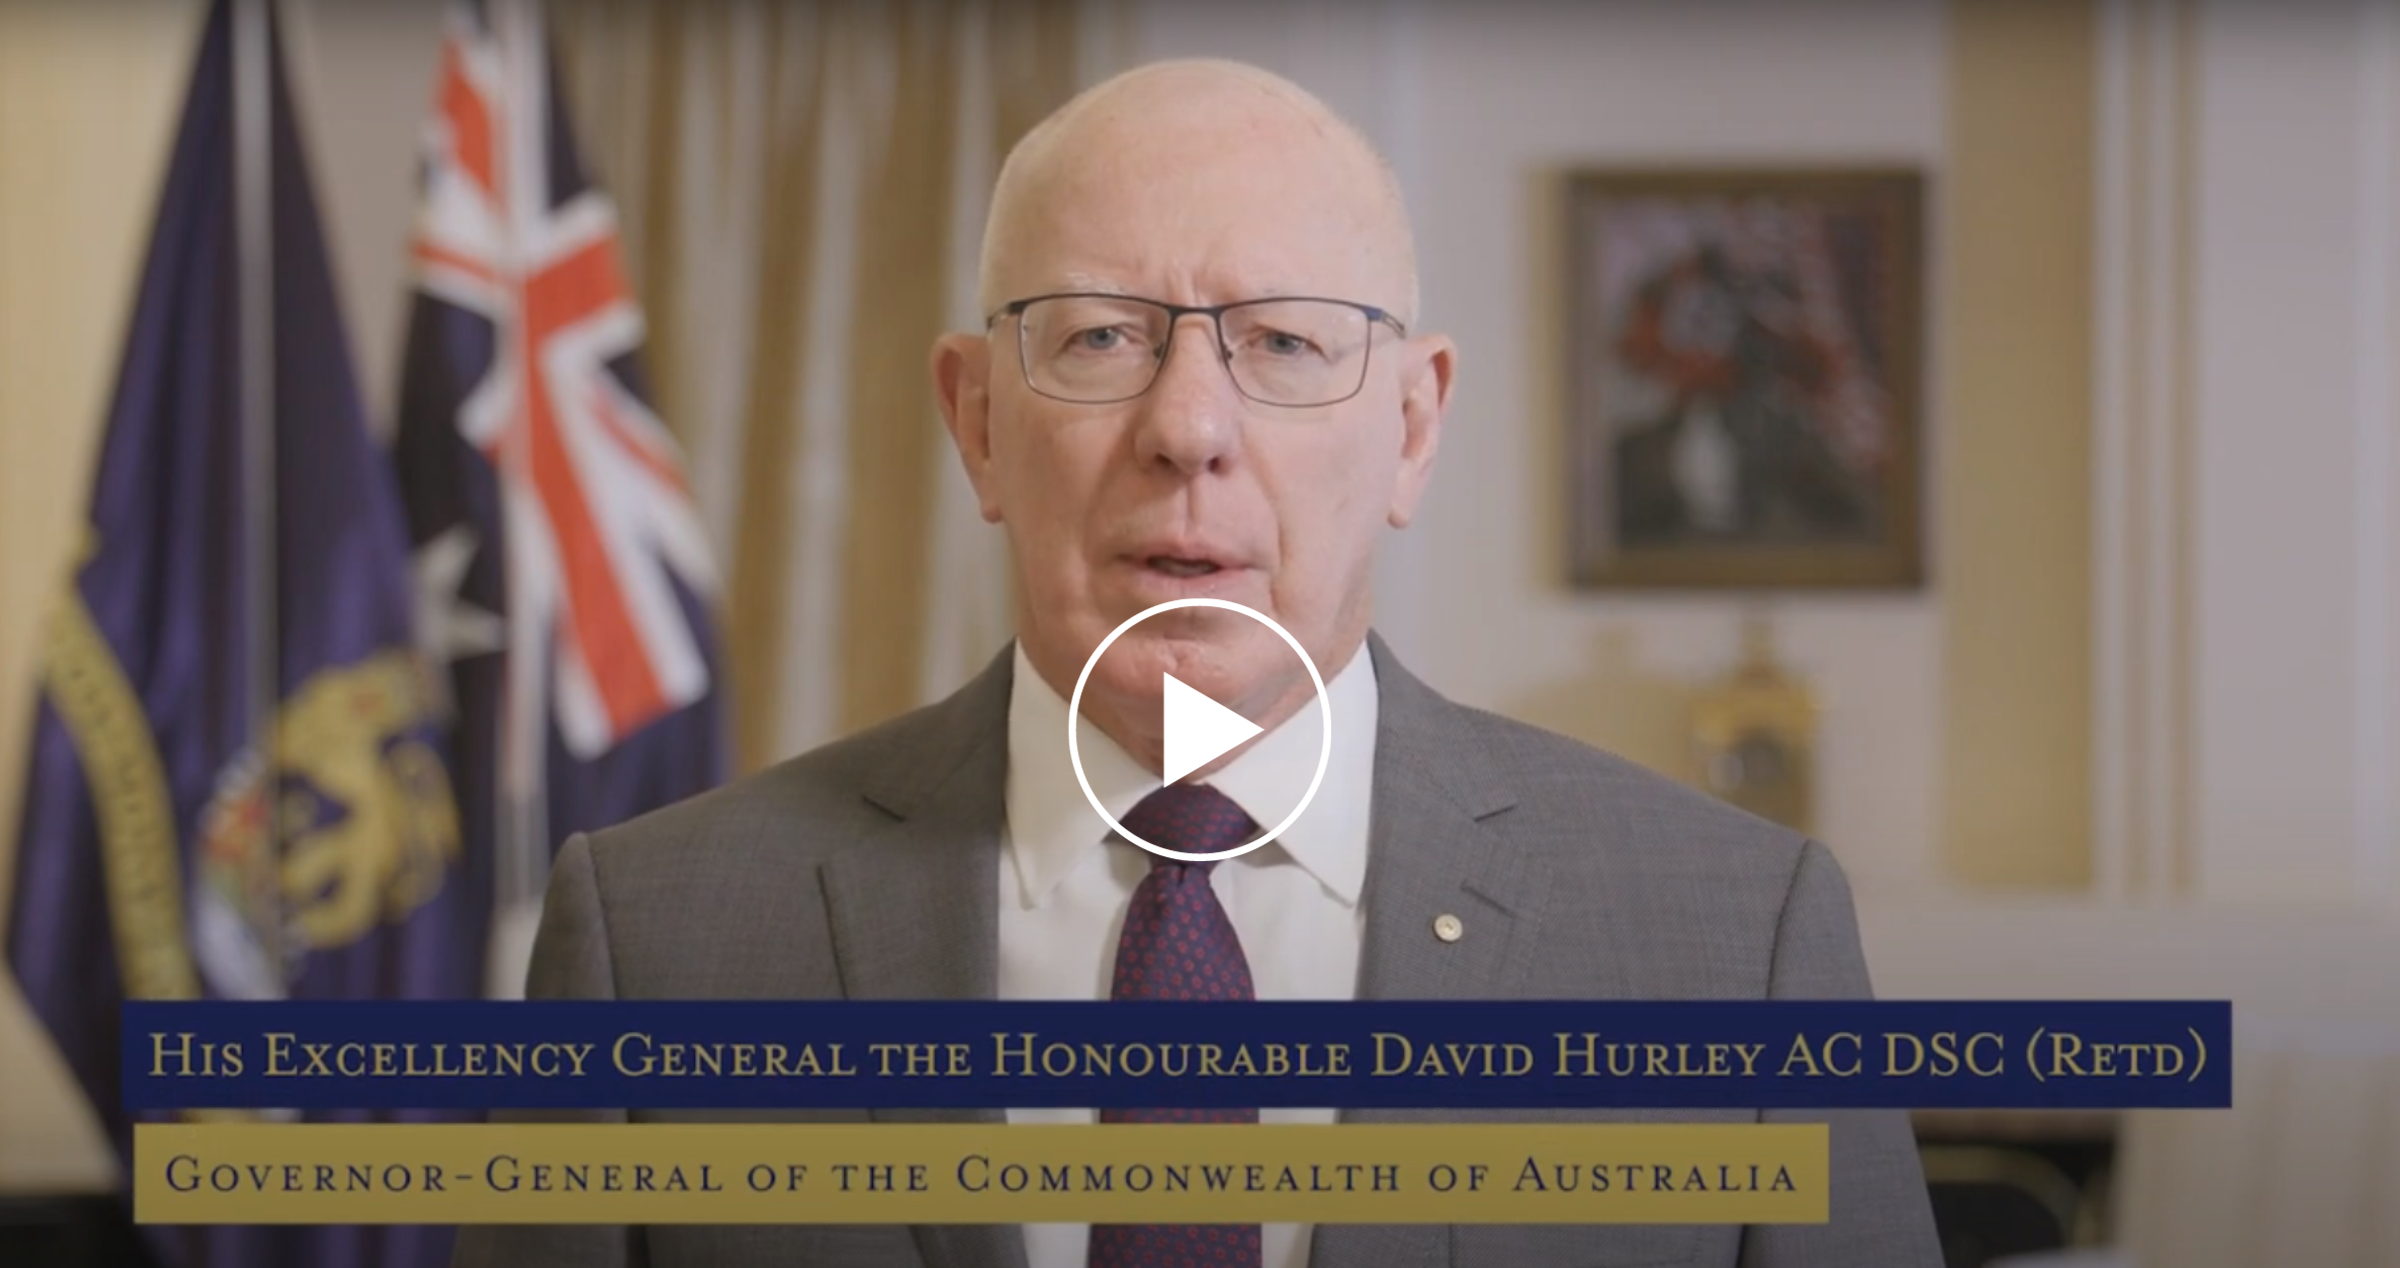 Image of the Australian Governor-General, David Hurley